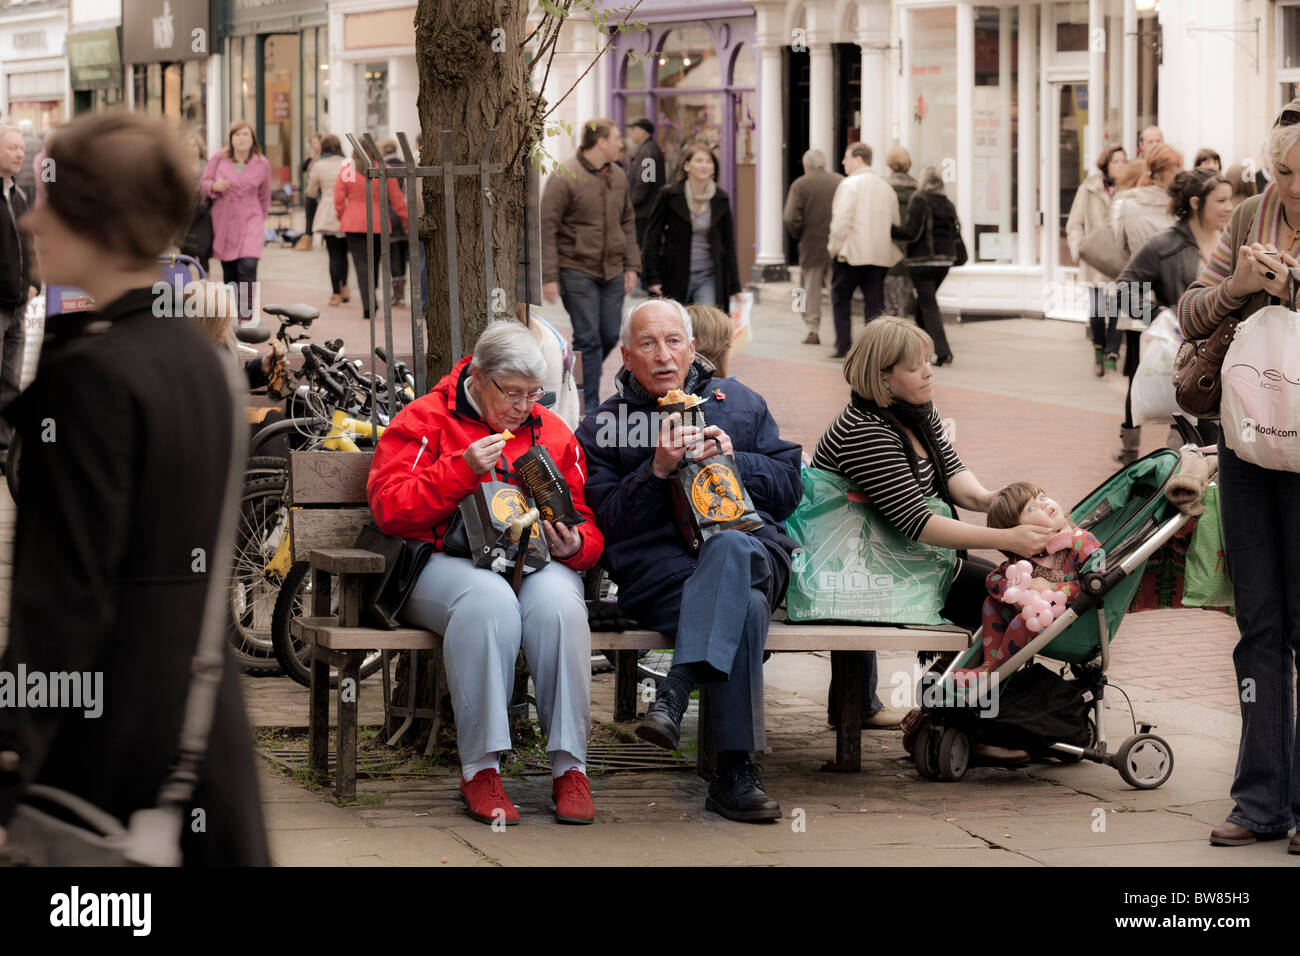 two older people eating take away cornish pasties on a city high street bench Stock Photo